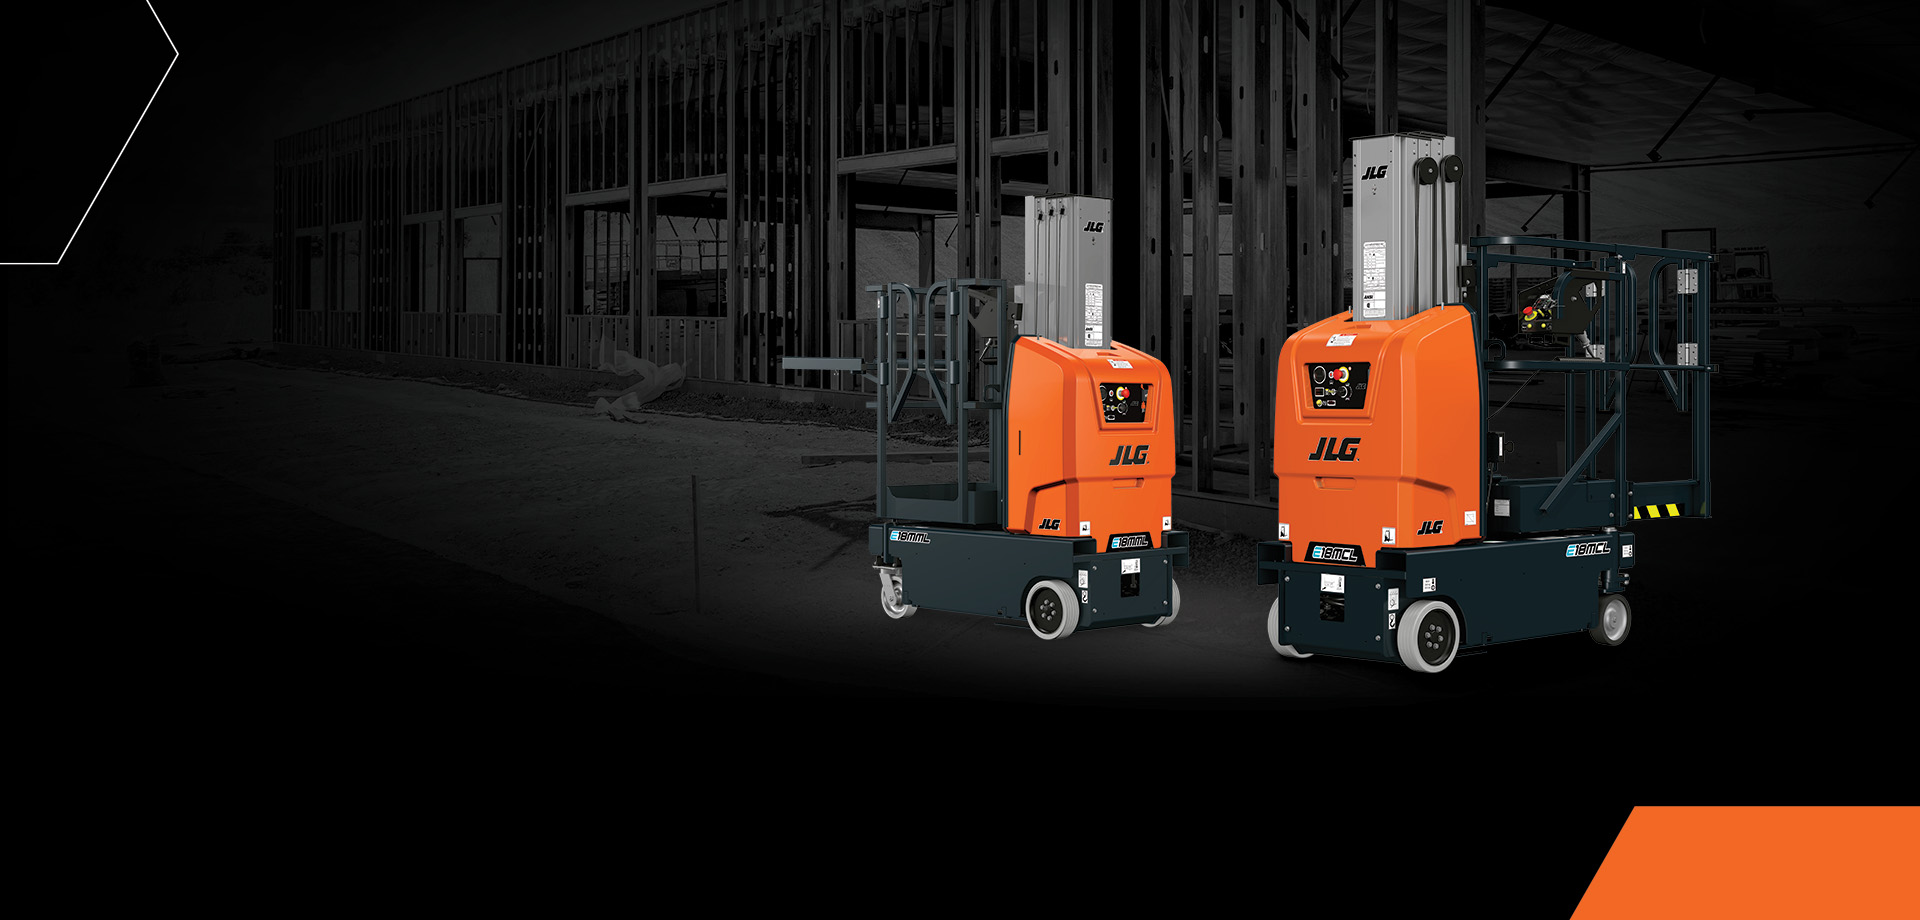 JLG Lift Equipment Lift and Equipment Manufacturer US and Canada